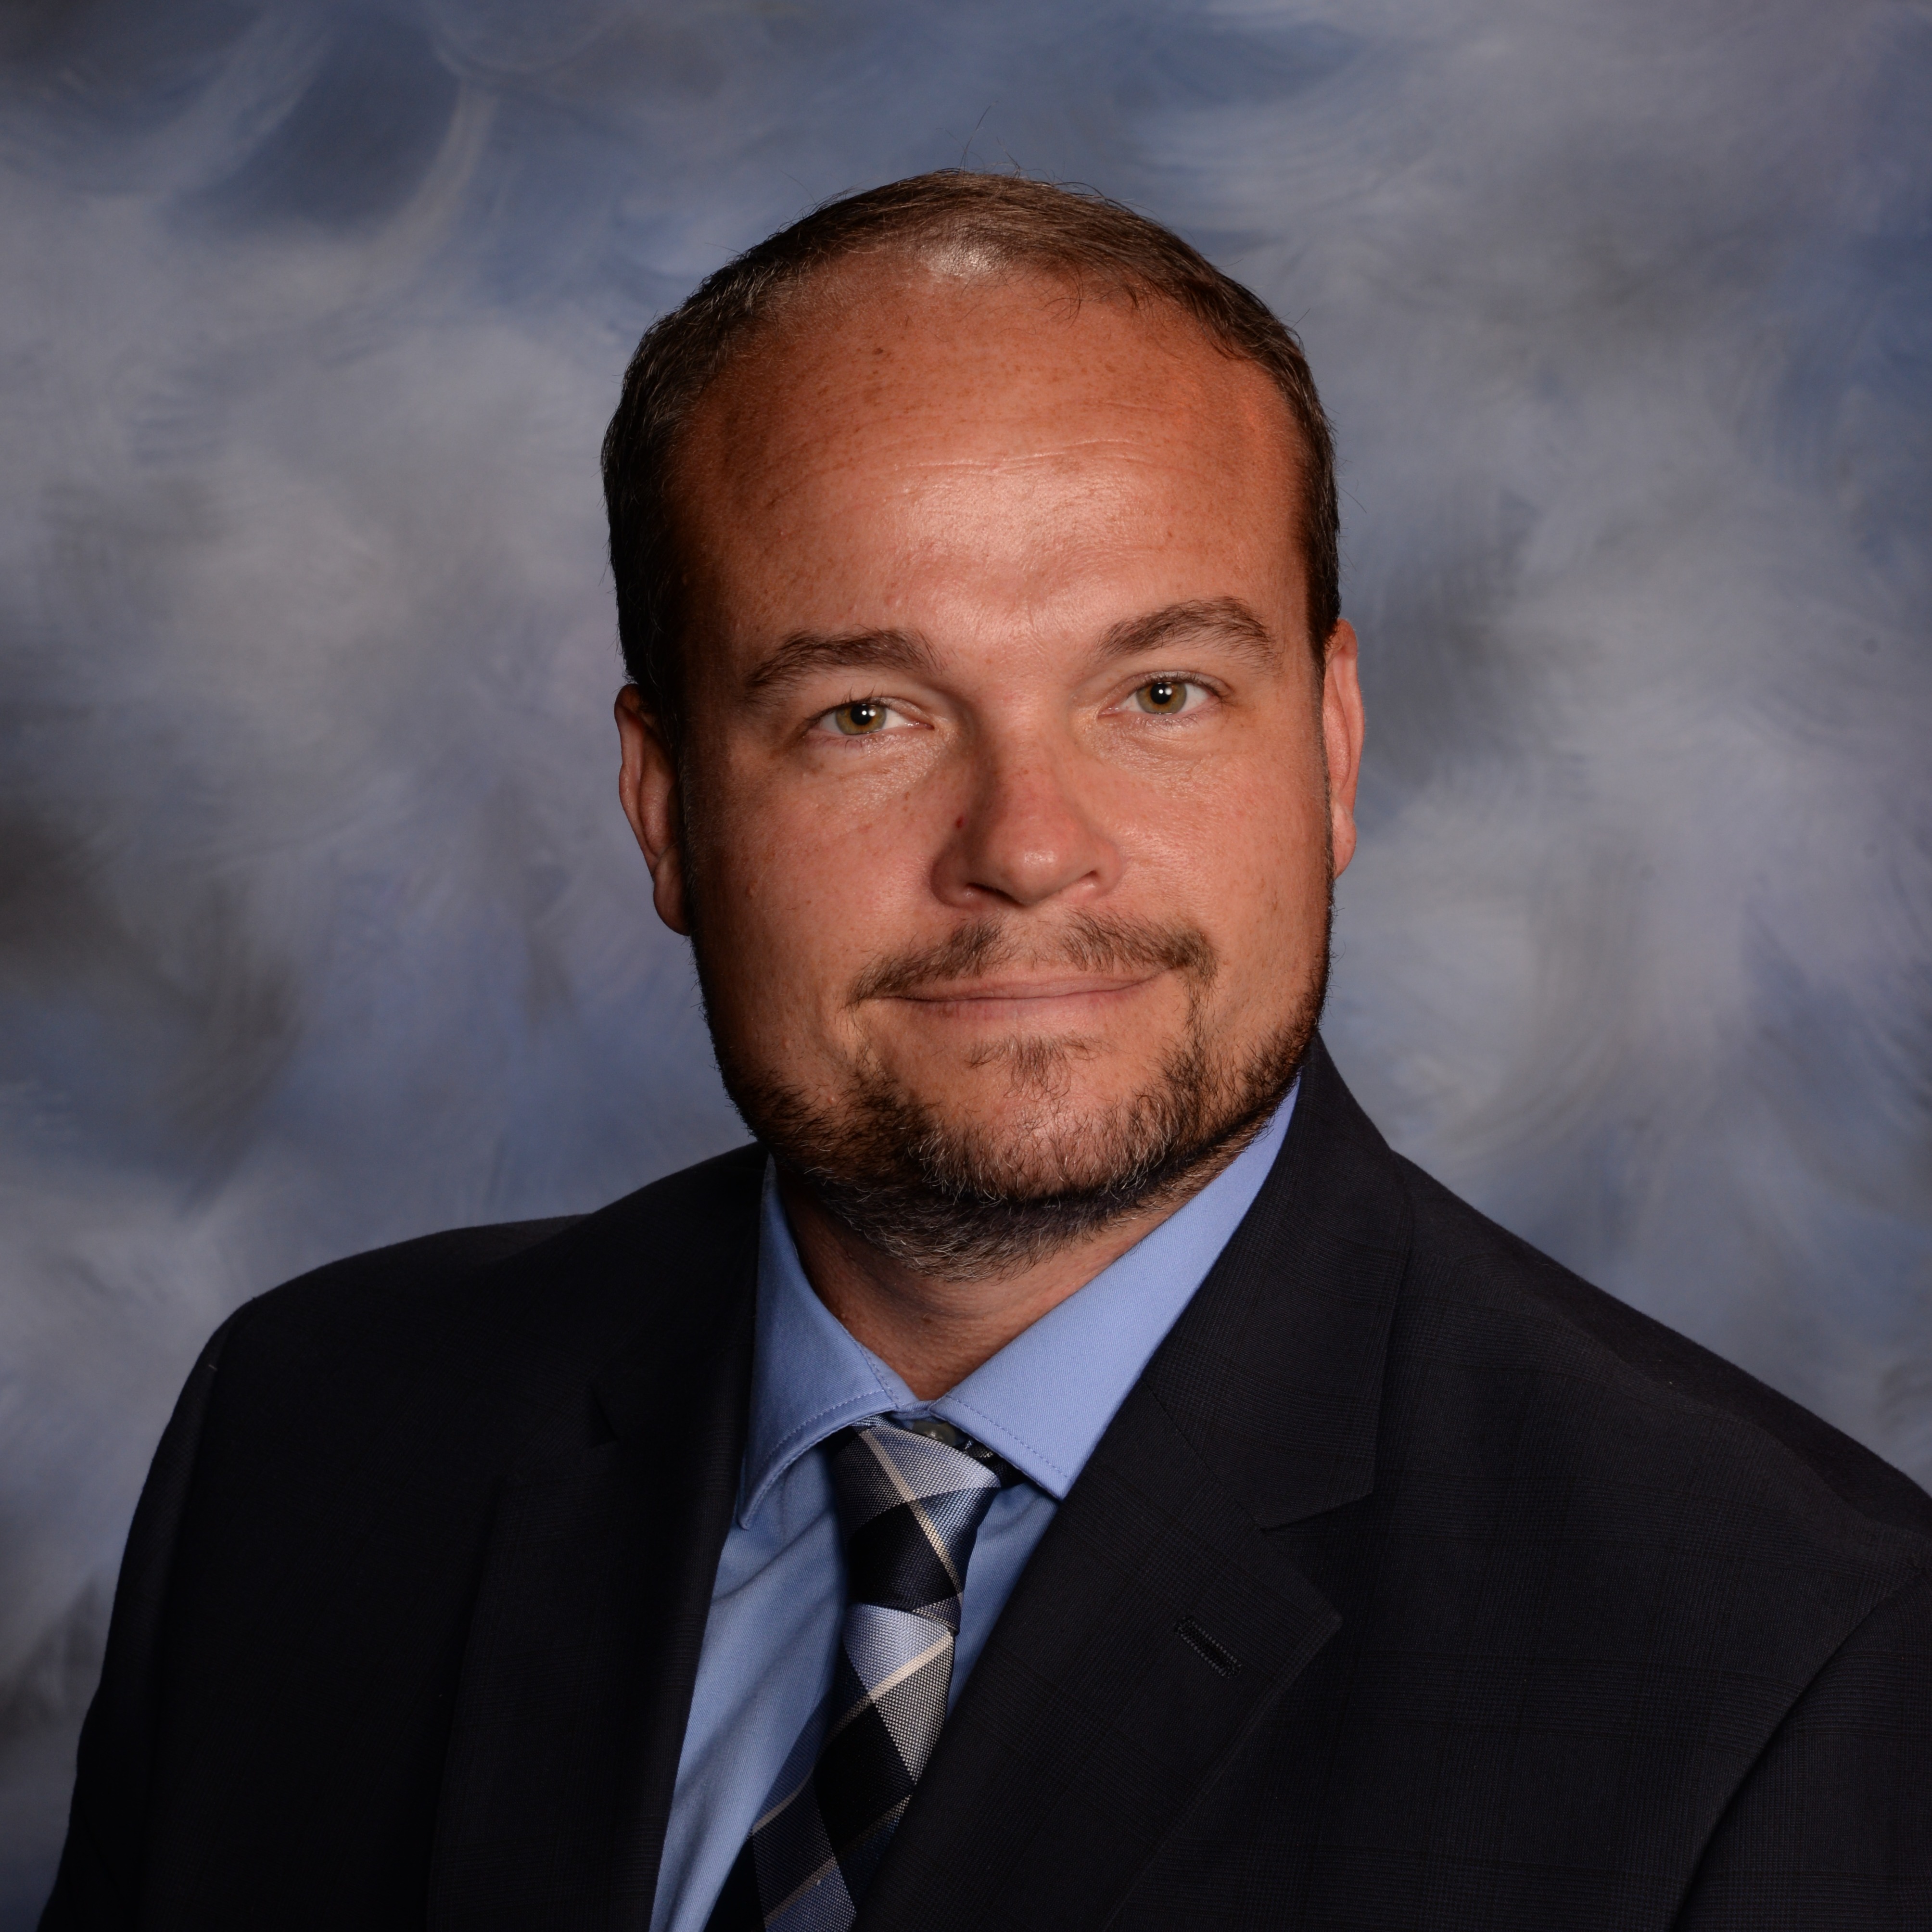 Justin Covert - Director of Transportation for Lee County Schools